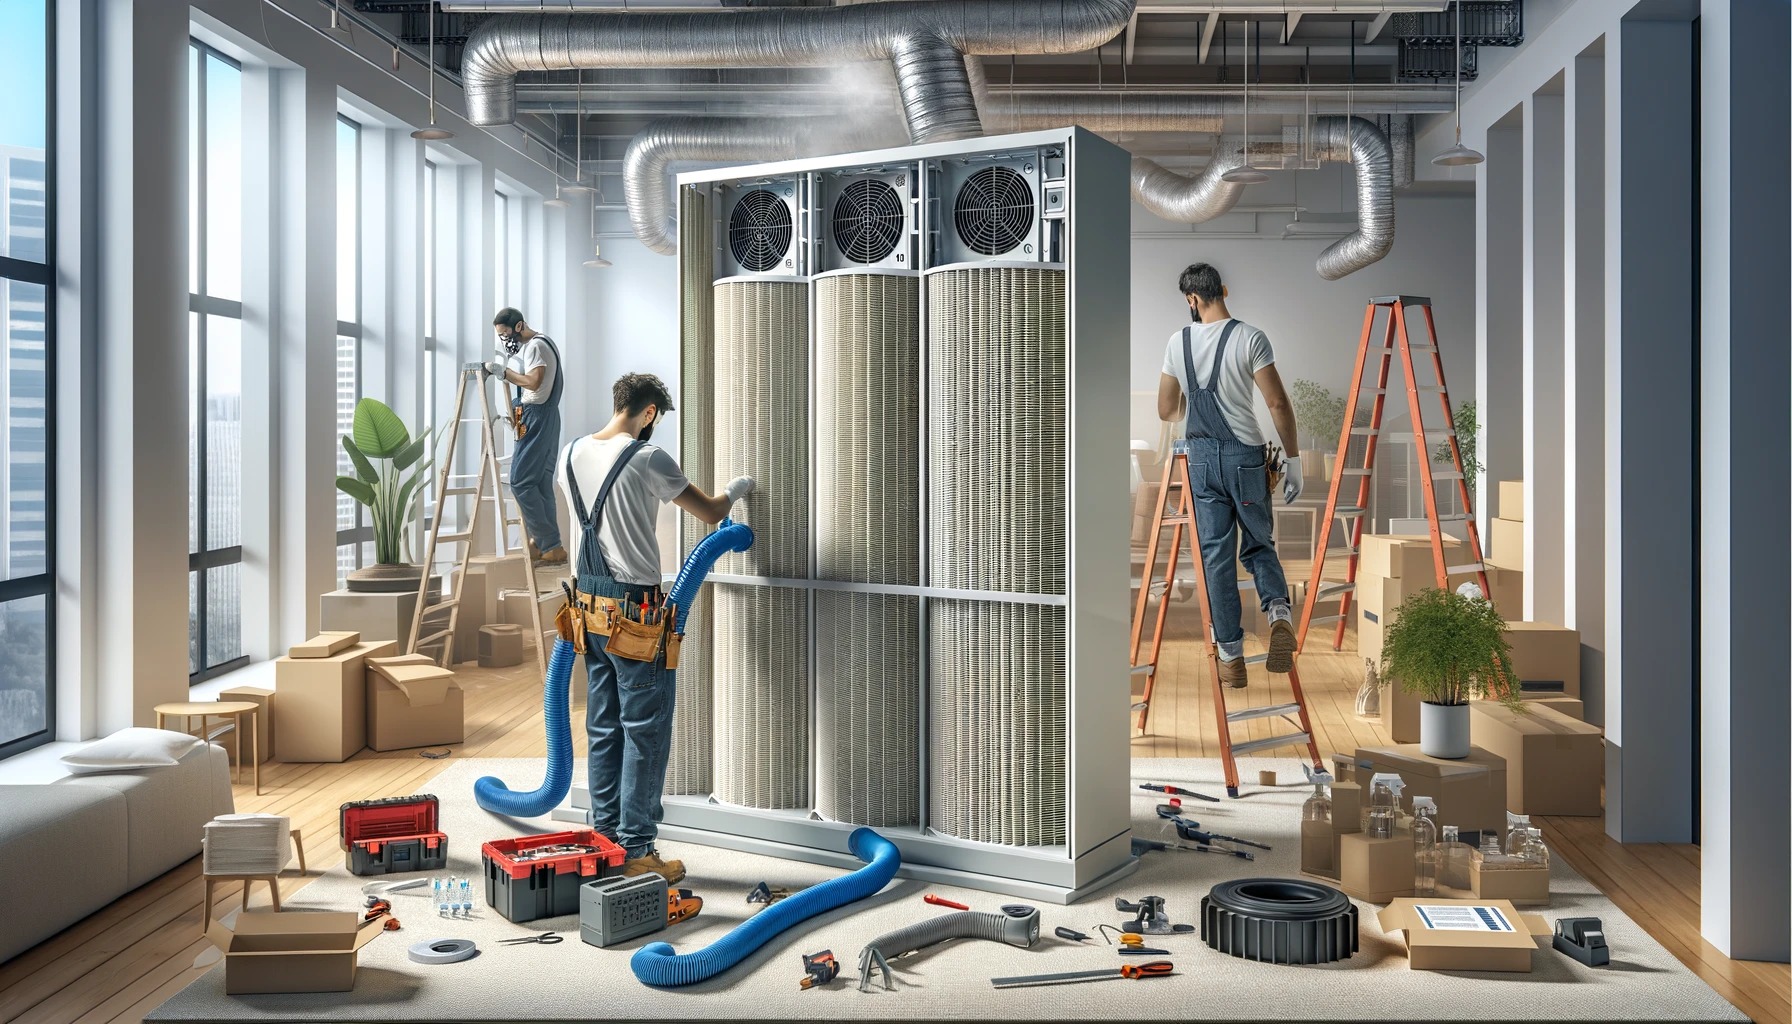 hepa air filtration system installation commercial building